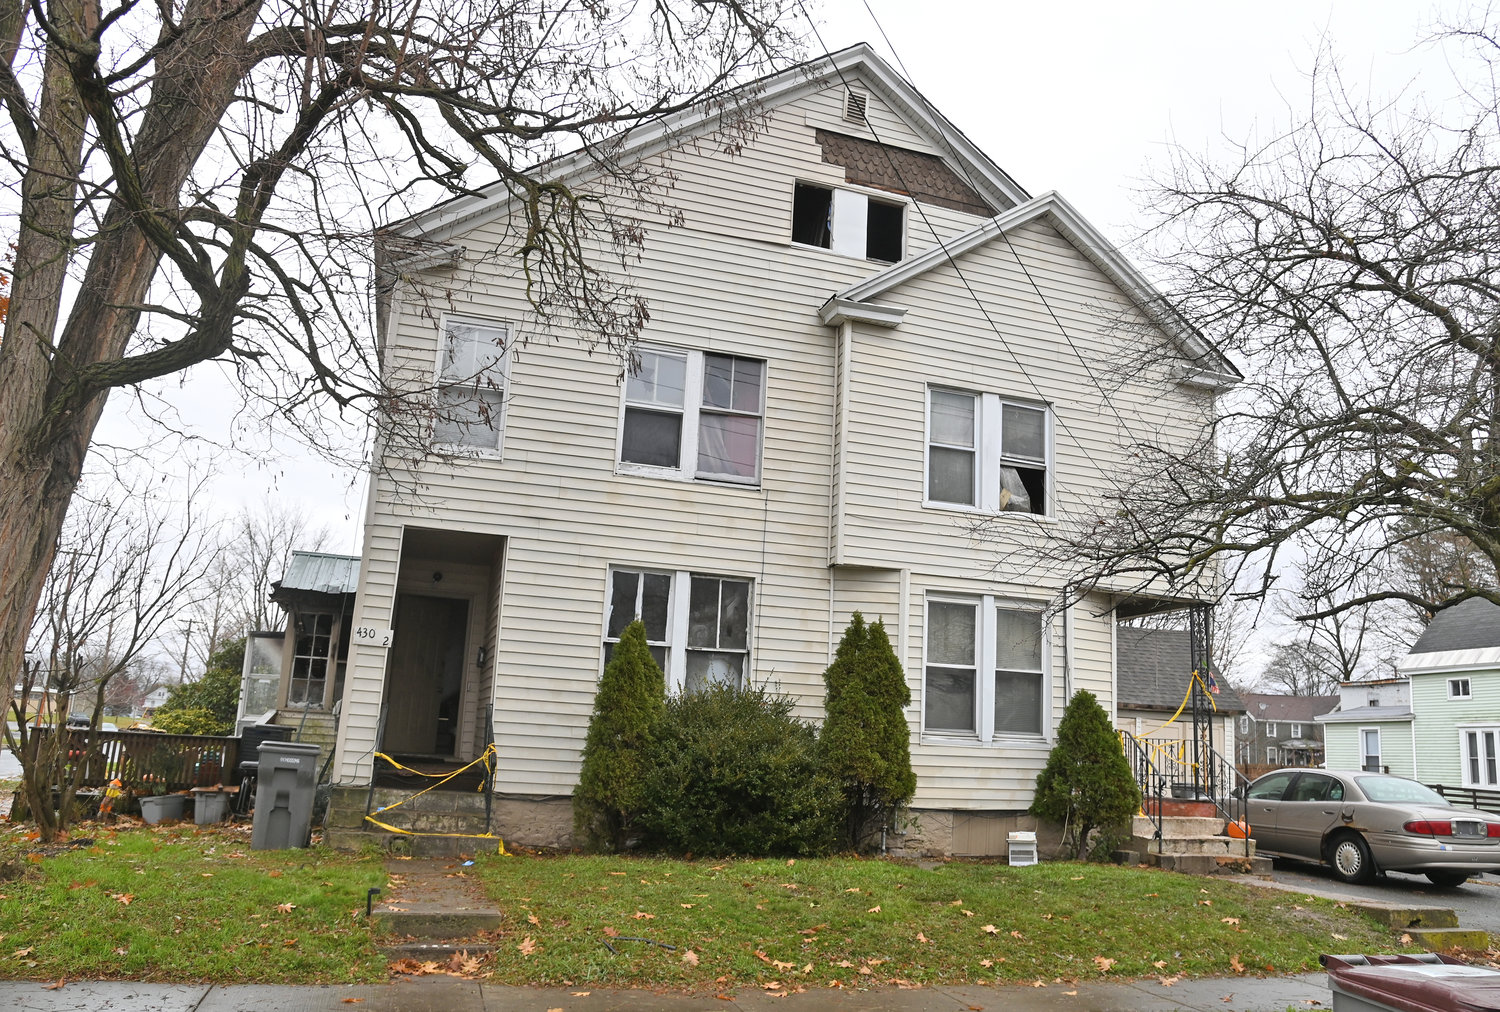 NO ONE INJURED IN FIRE — None of the roughly eight residents were injured in a fire Thursday morning at 430 W. Court St. in Rome.